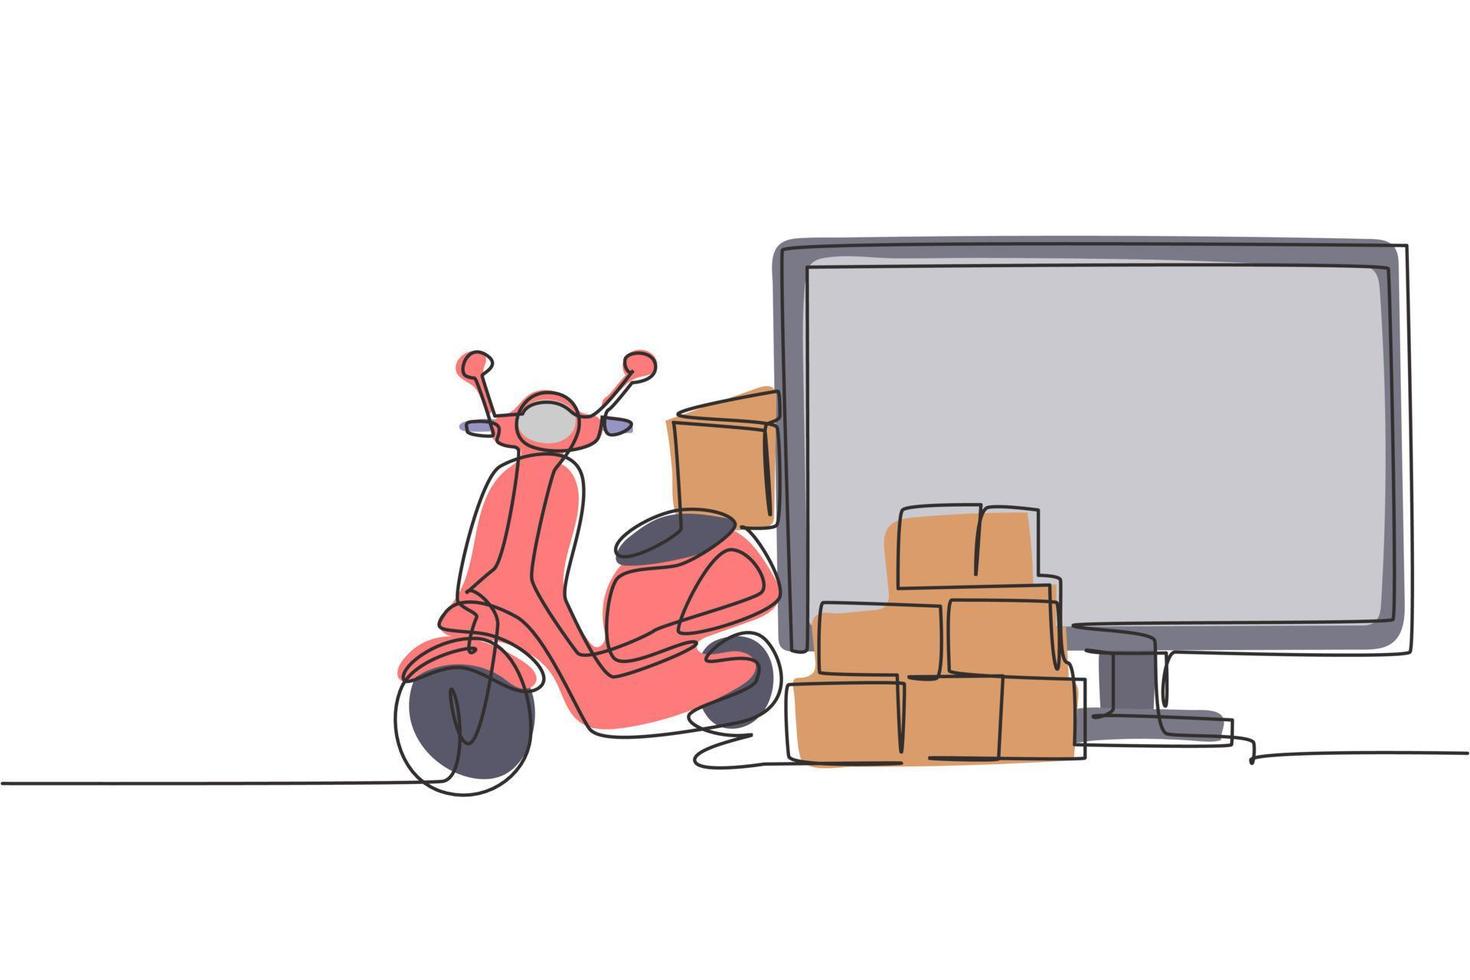 Single one line drawing giant monitor standing in front of courier scooter and pile of package boxes. Online delivery service concept. Modern continuous line draw design graphic vector illustration